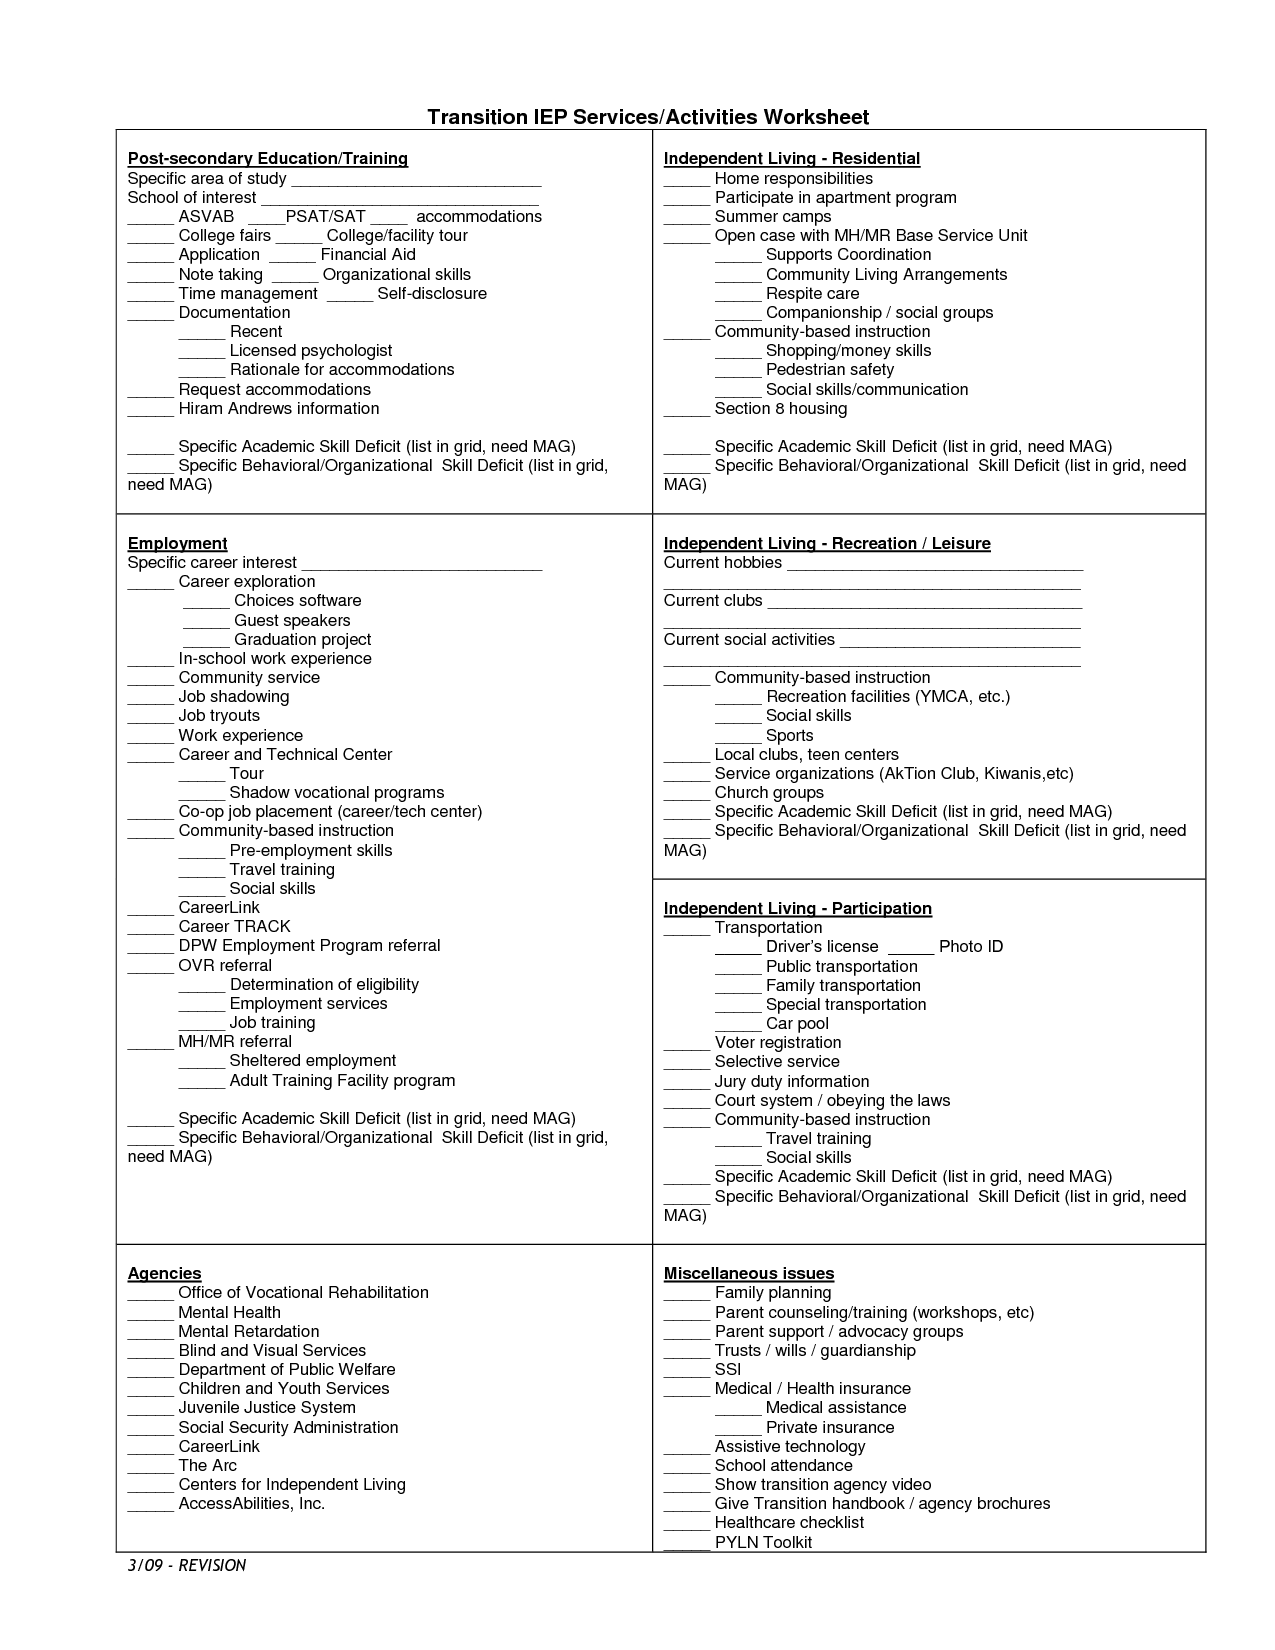 develop-life-skills-with-these-practical-worksheets-style-worksheets